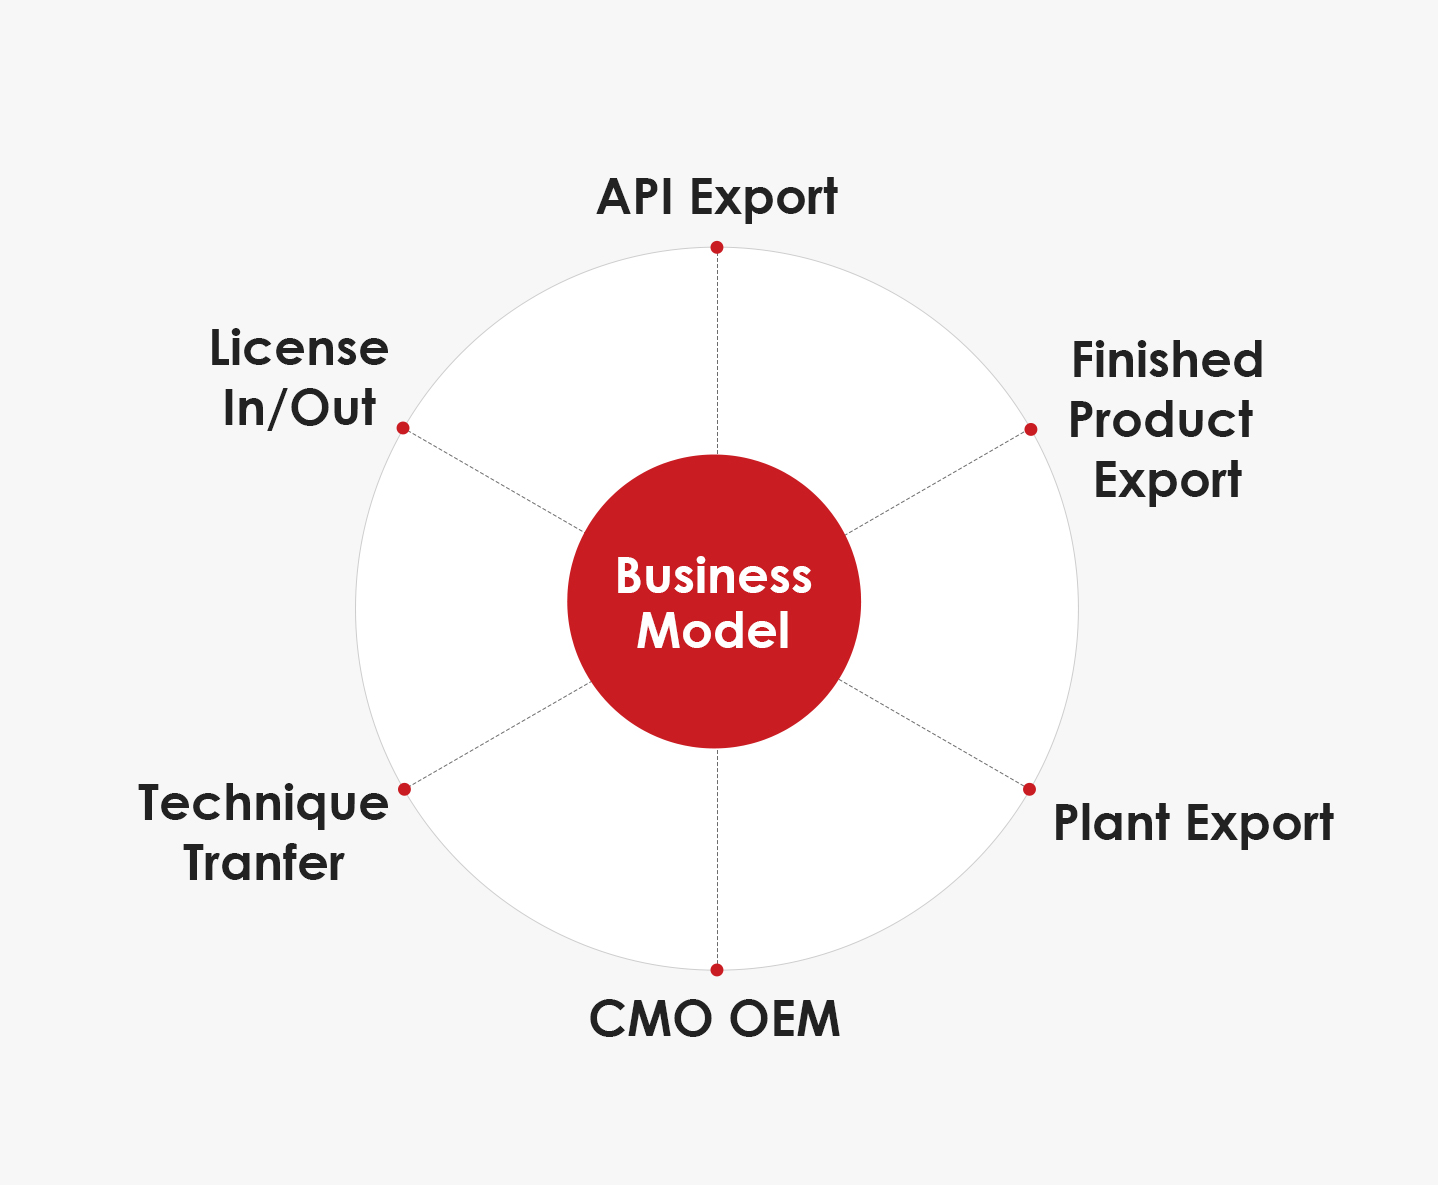 Business Model - APi Export, Finished Product Export, Plant Export, CMO OEM, Technique Tranfer, License In/Out 